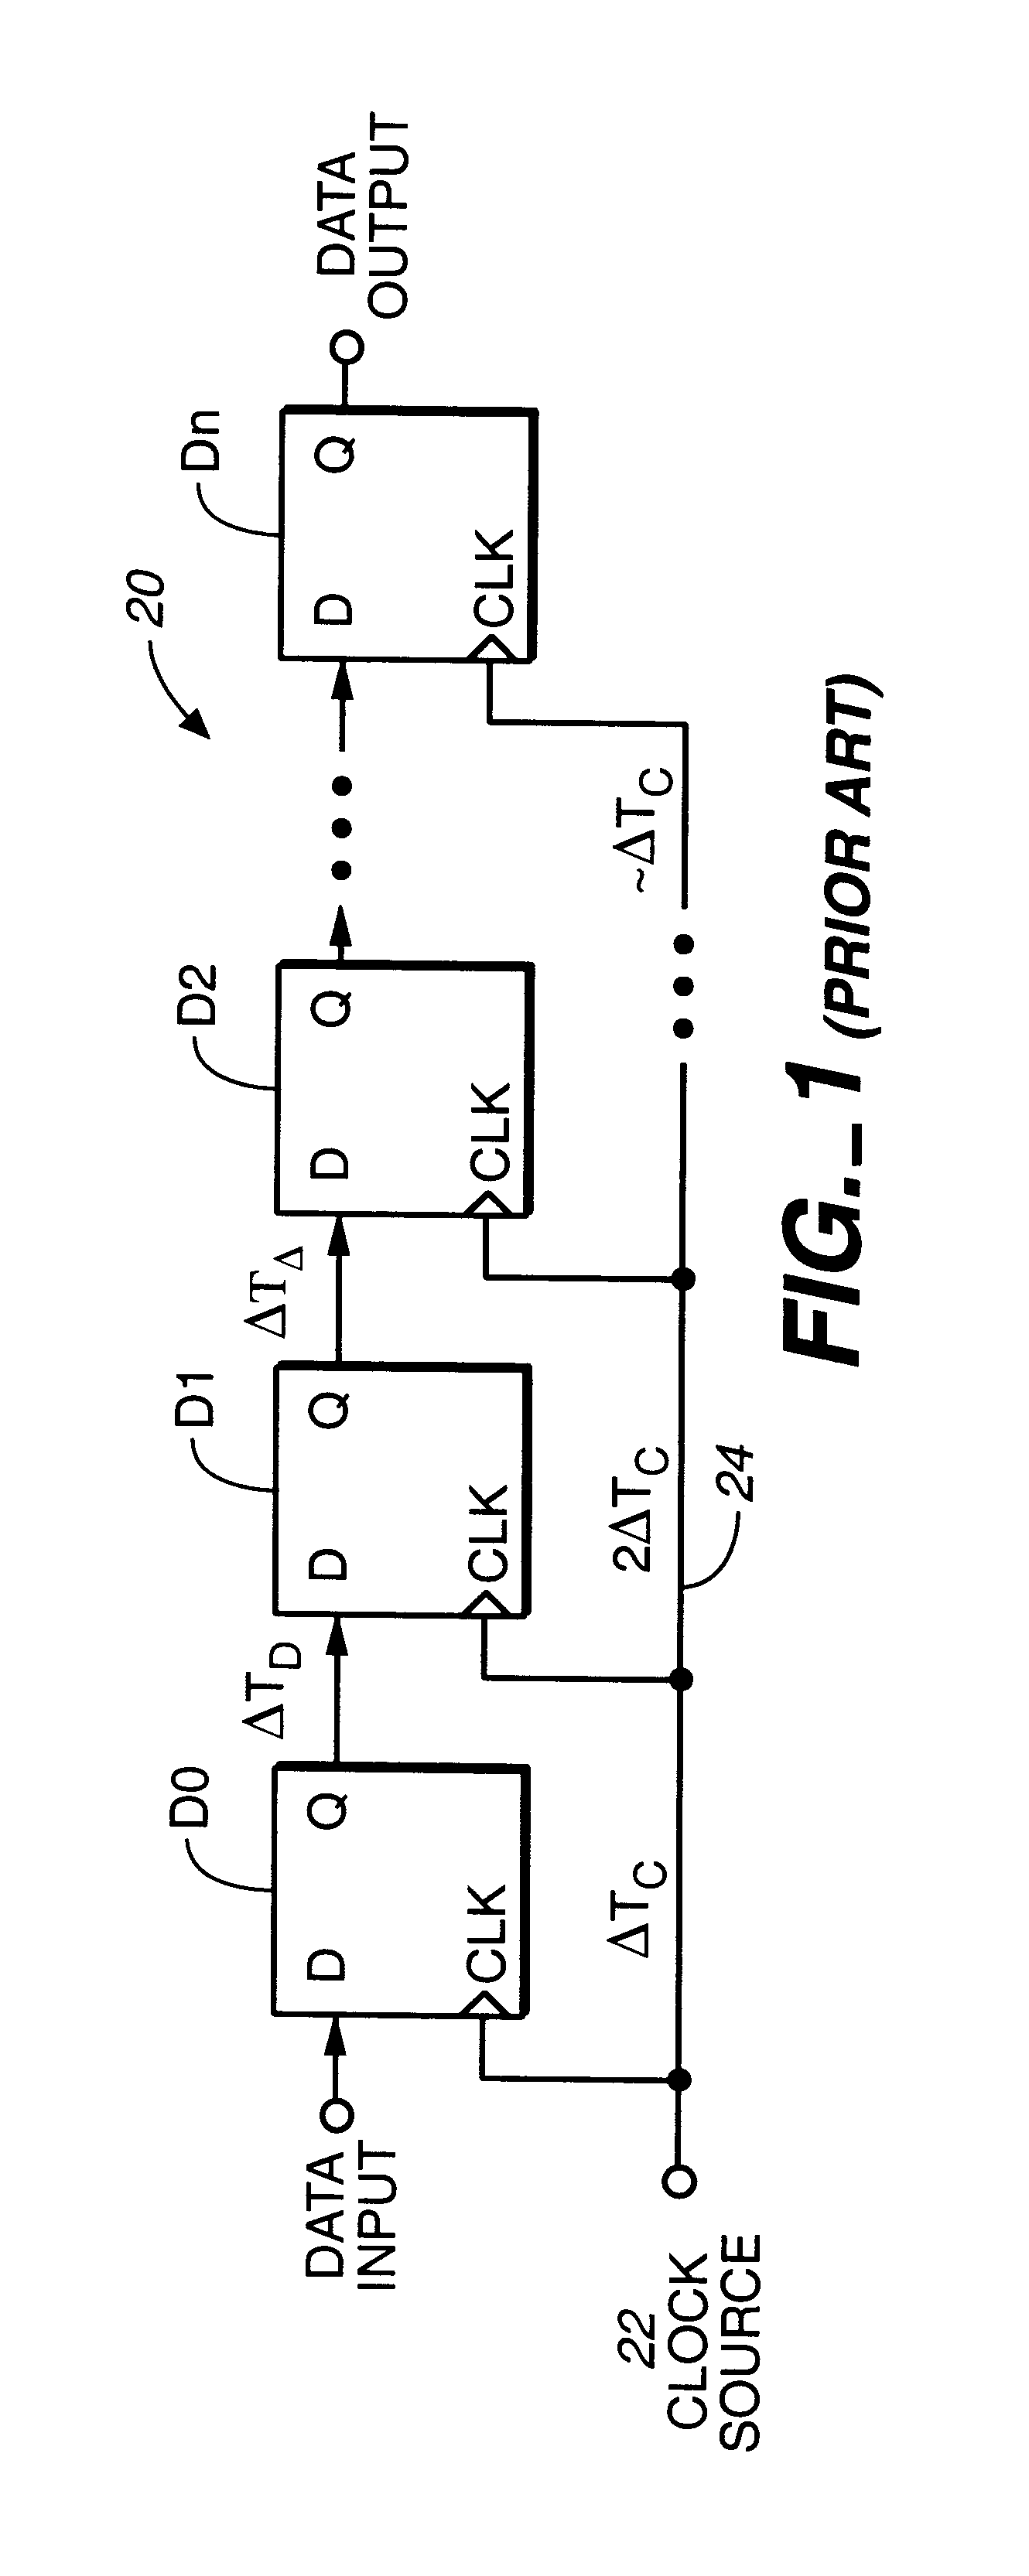 Clock distribution network planning and method therefor